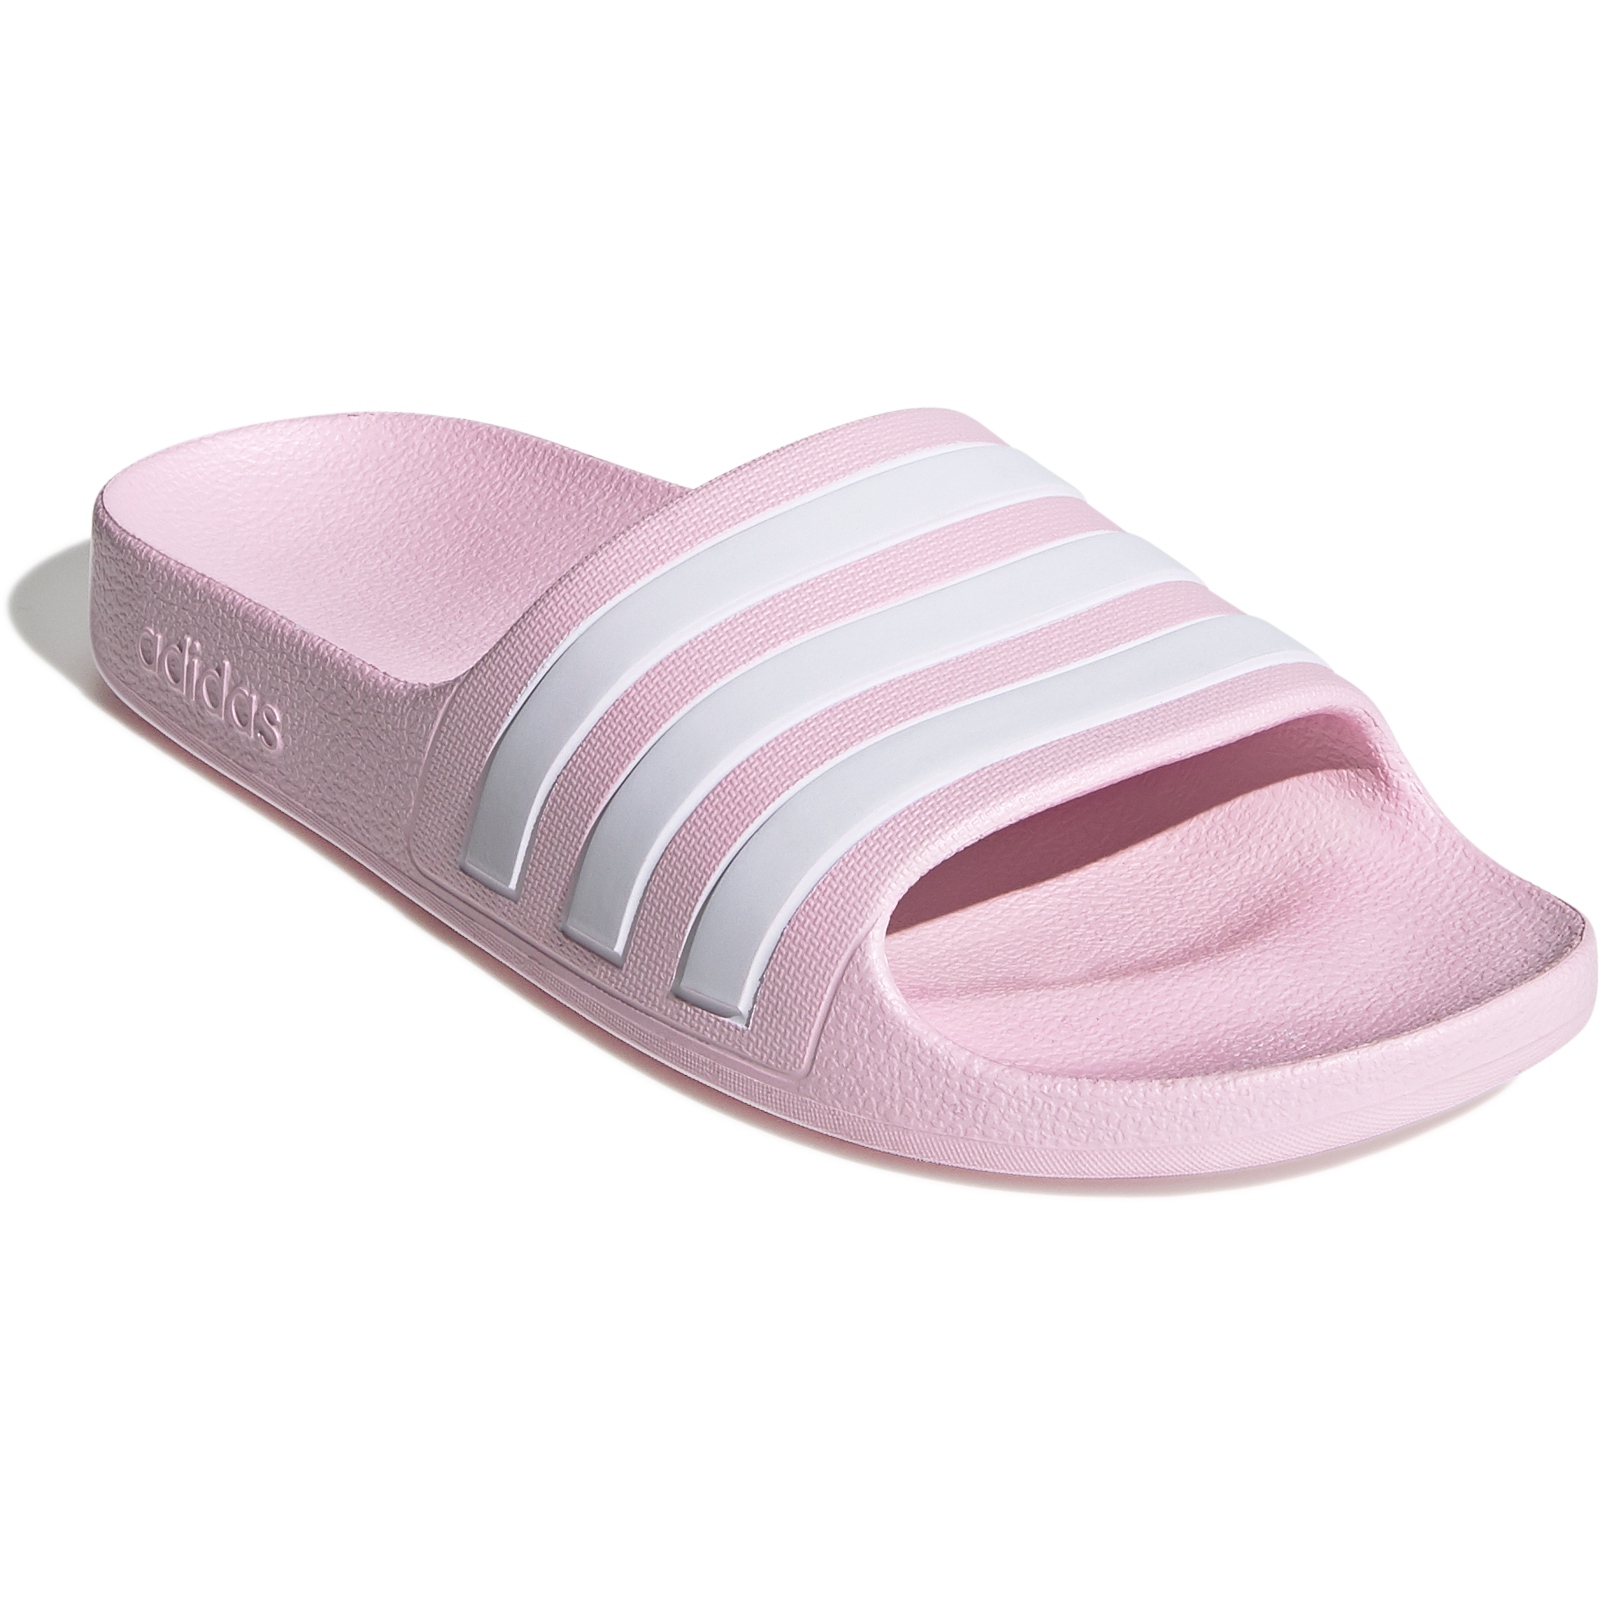 Picture of adidas Adilette Aqua Slides Kids - clear pink/white/clear pink FY8072